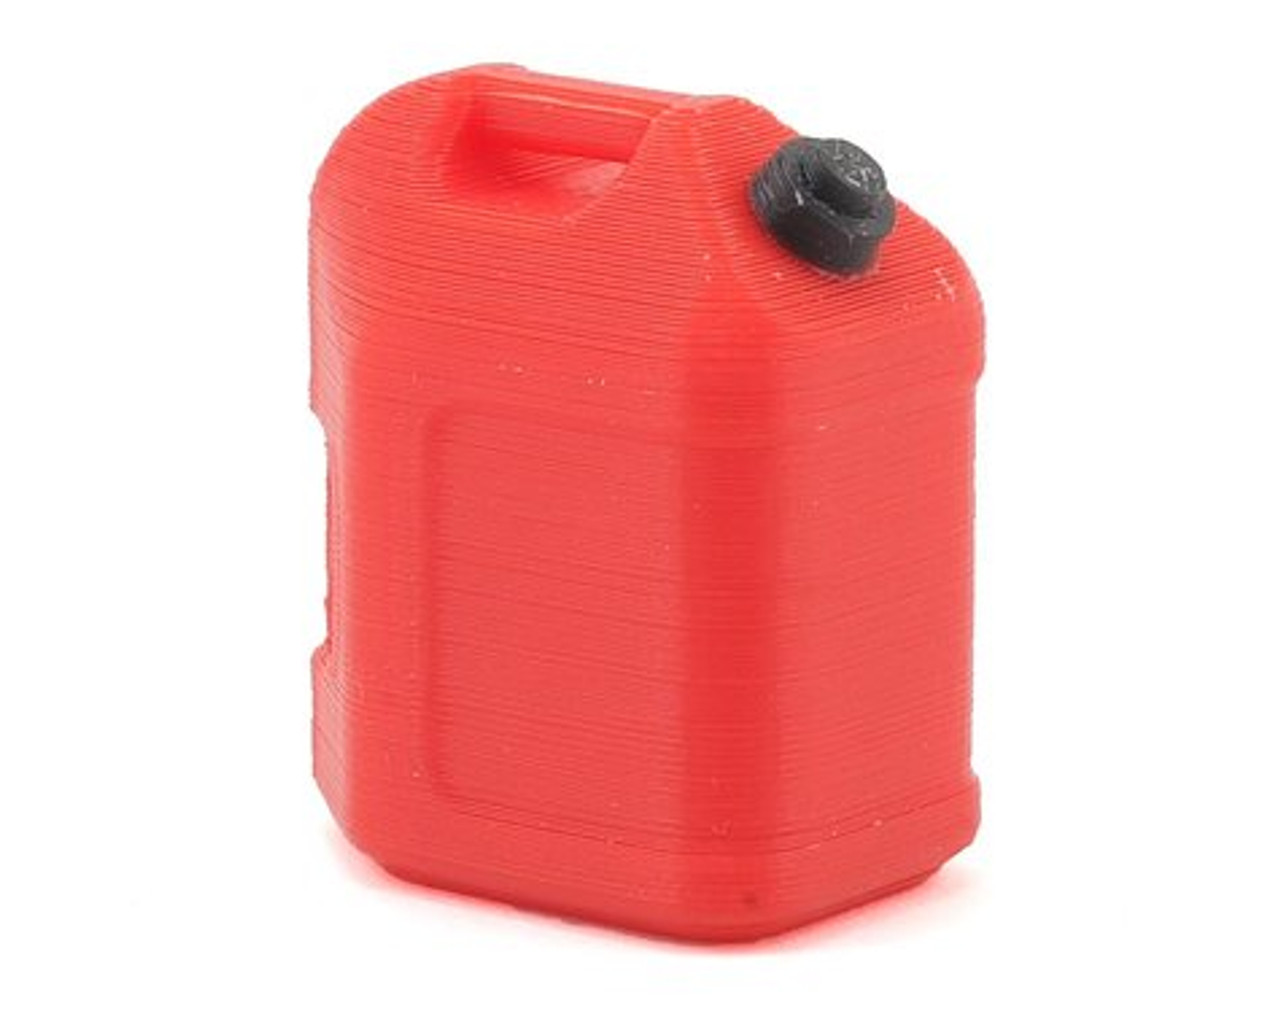 Scale By Chris Fuel Jug (Red) (Miniature Scale Accessory)